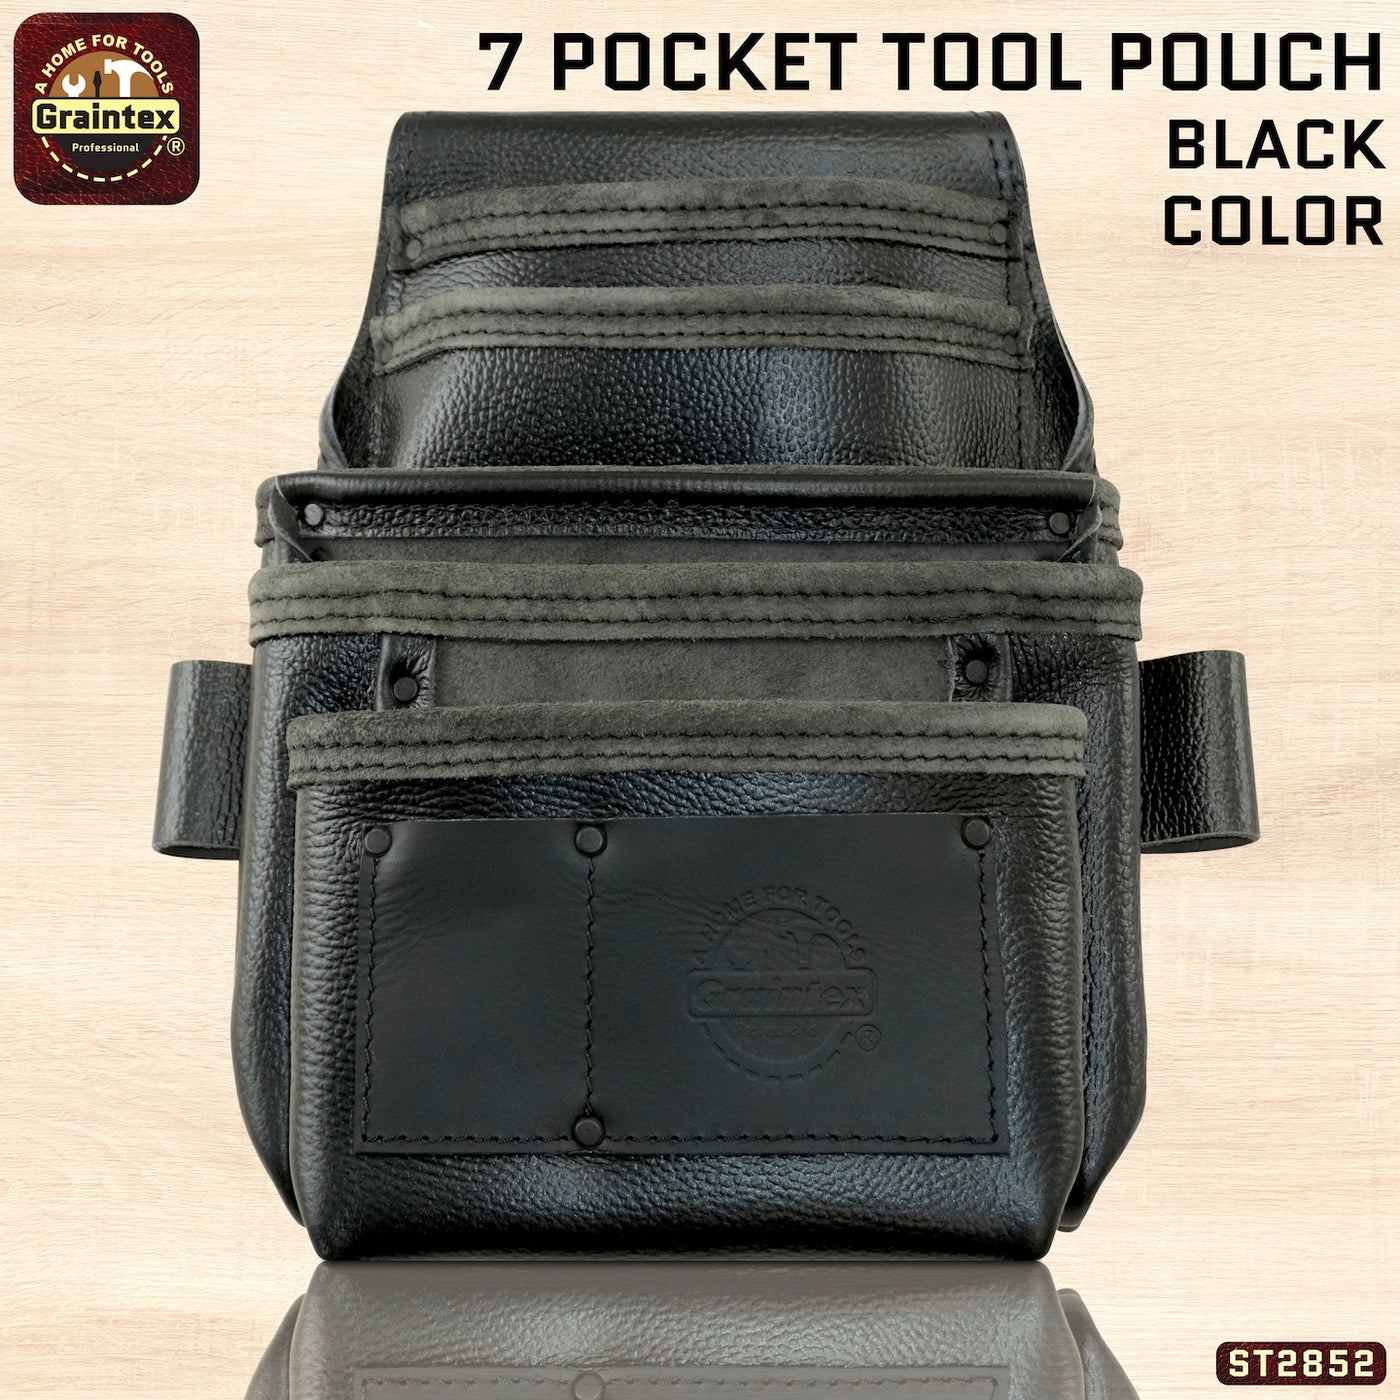 ST2852 :: 7 Pocket Nail & Tool Pouch RUGGED Black Color Top Grain Leather